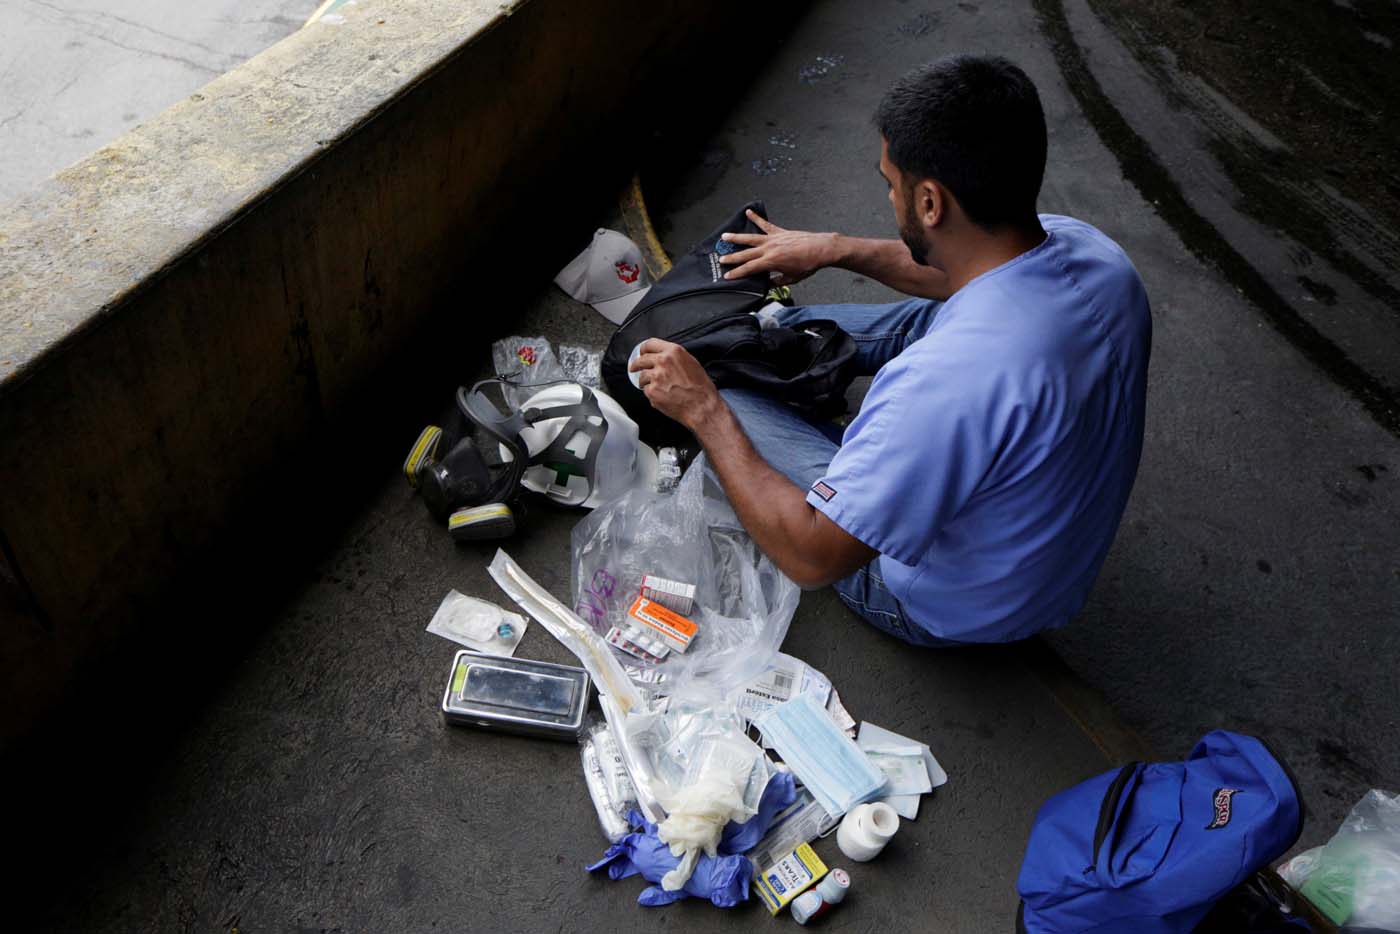 A volunteer puts medical supplies in his backpack as he gets ready for help injured demonstrators in Caracas, Venezuela April 22, 2017. Picture taken April 22, 2017. REUTERS/Marco Bello